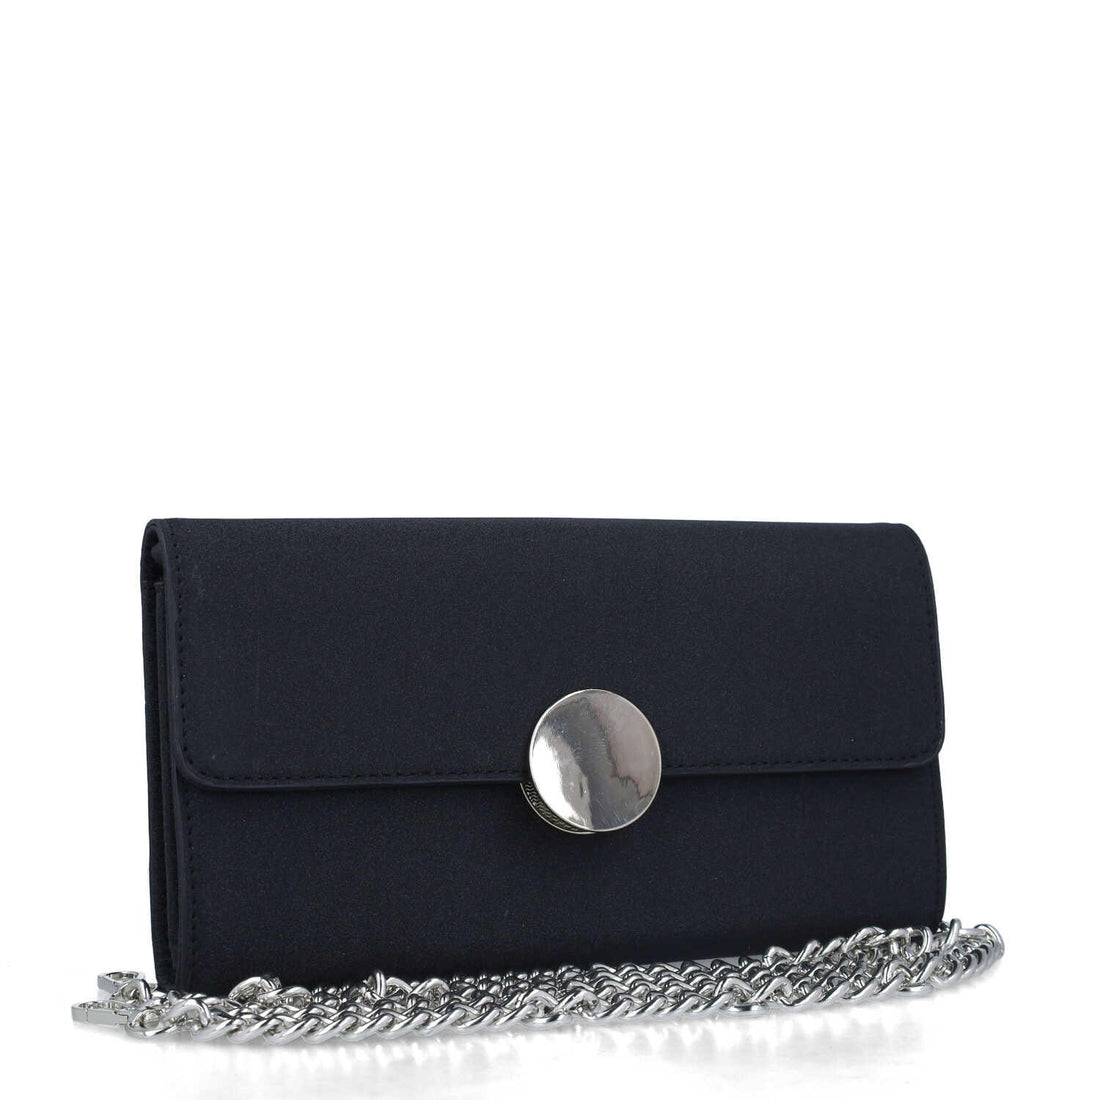 Black Clutch Bag With Chain Strap_85712_01_02